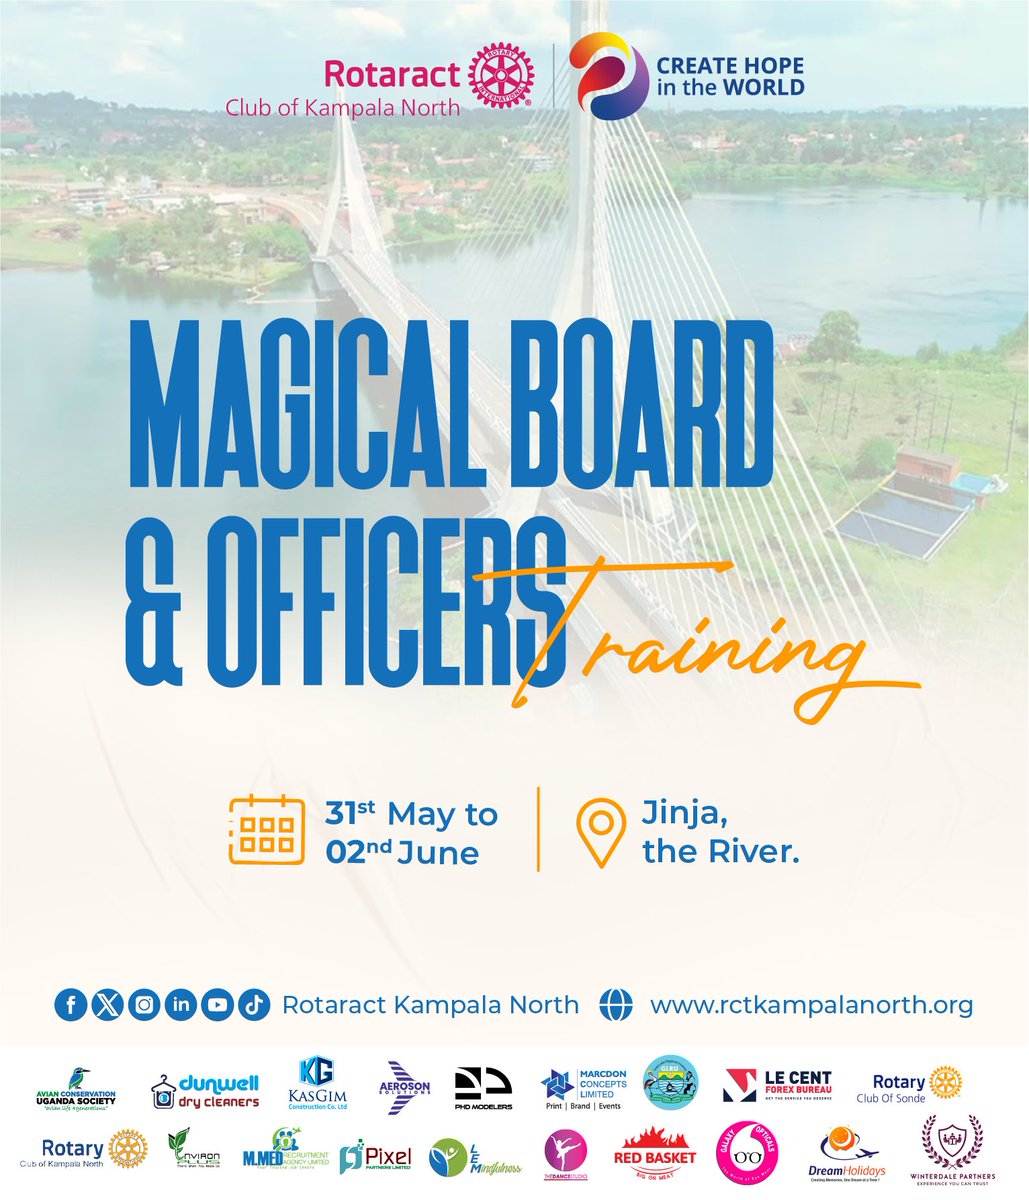 Getting  ready for leadership excellence! 

Our Magical Board and Officers will undergo training from 31st to 2nd June, gearing up for a remarkable New Rotary Year. 
#KANOsBoardAndOfficersTraining